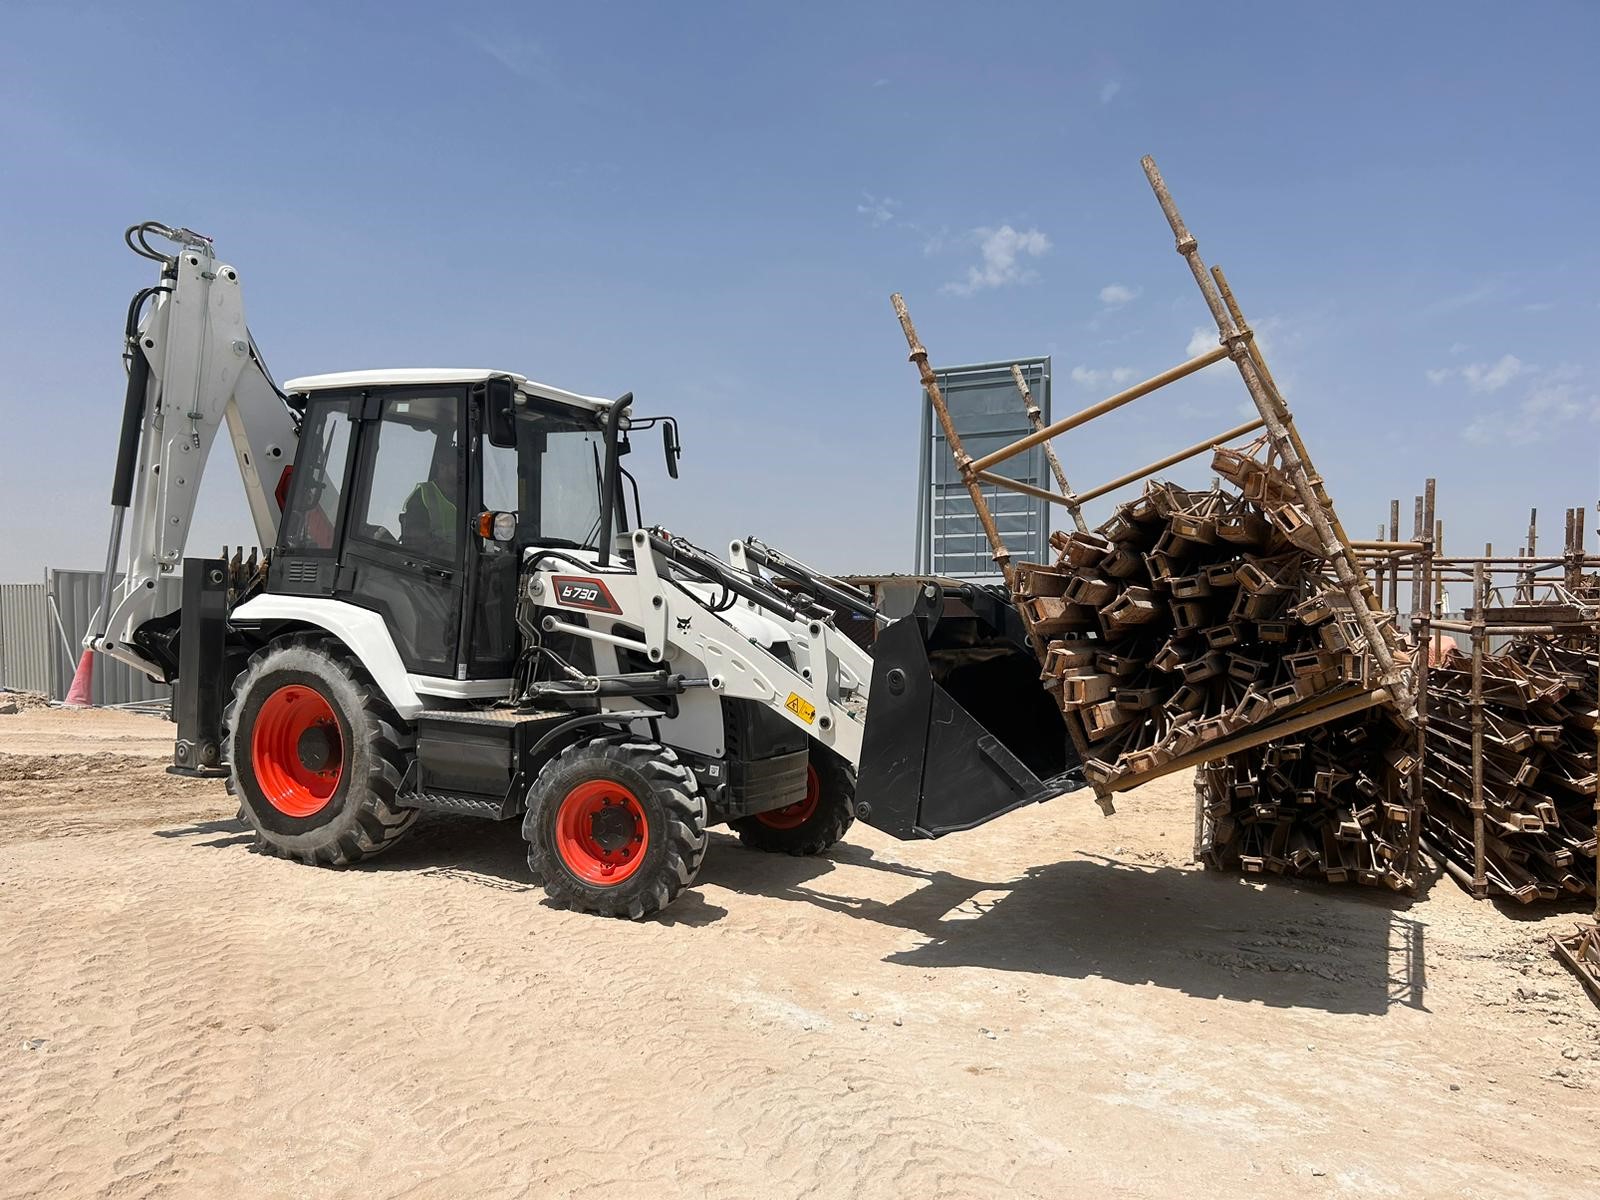 Introducing the B730 M-Series Backhoe Loader